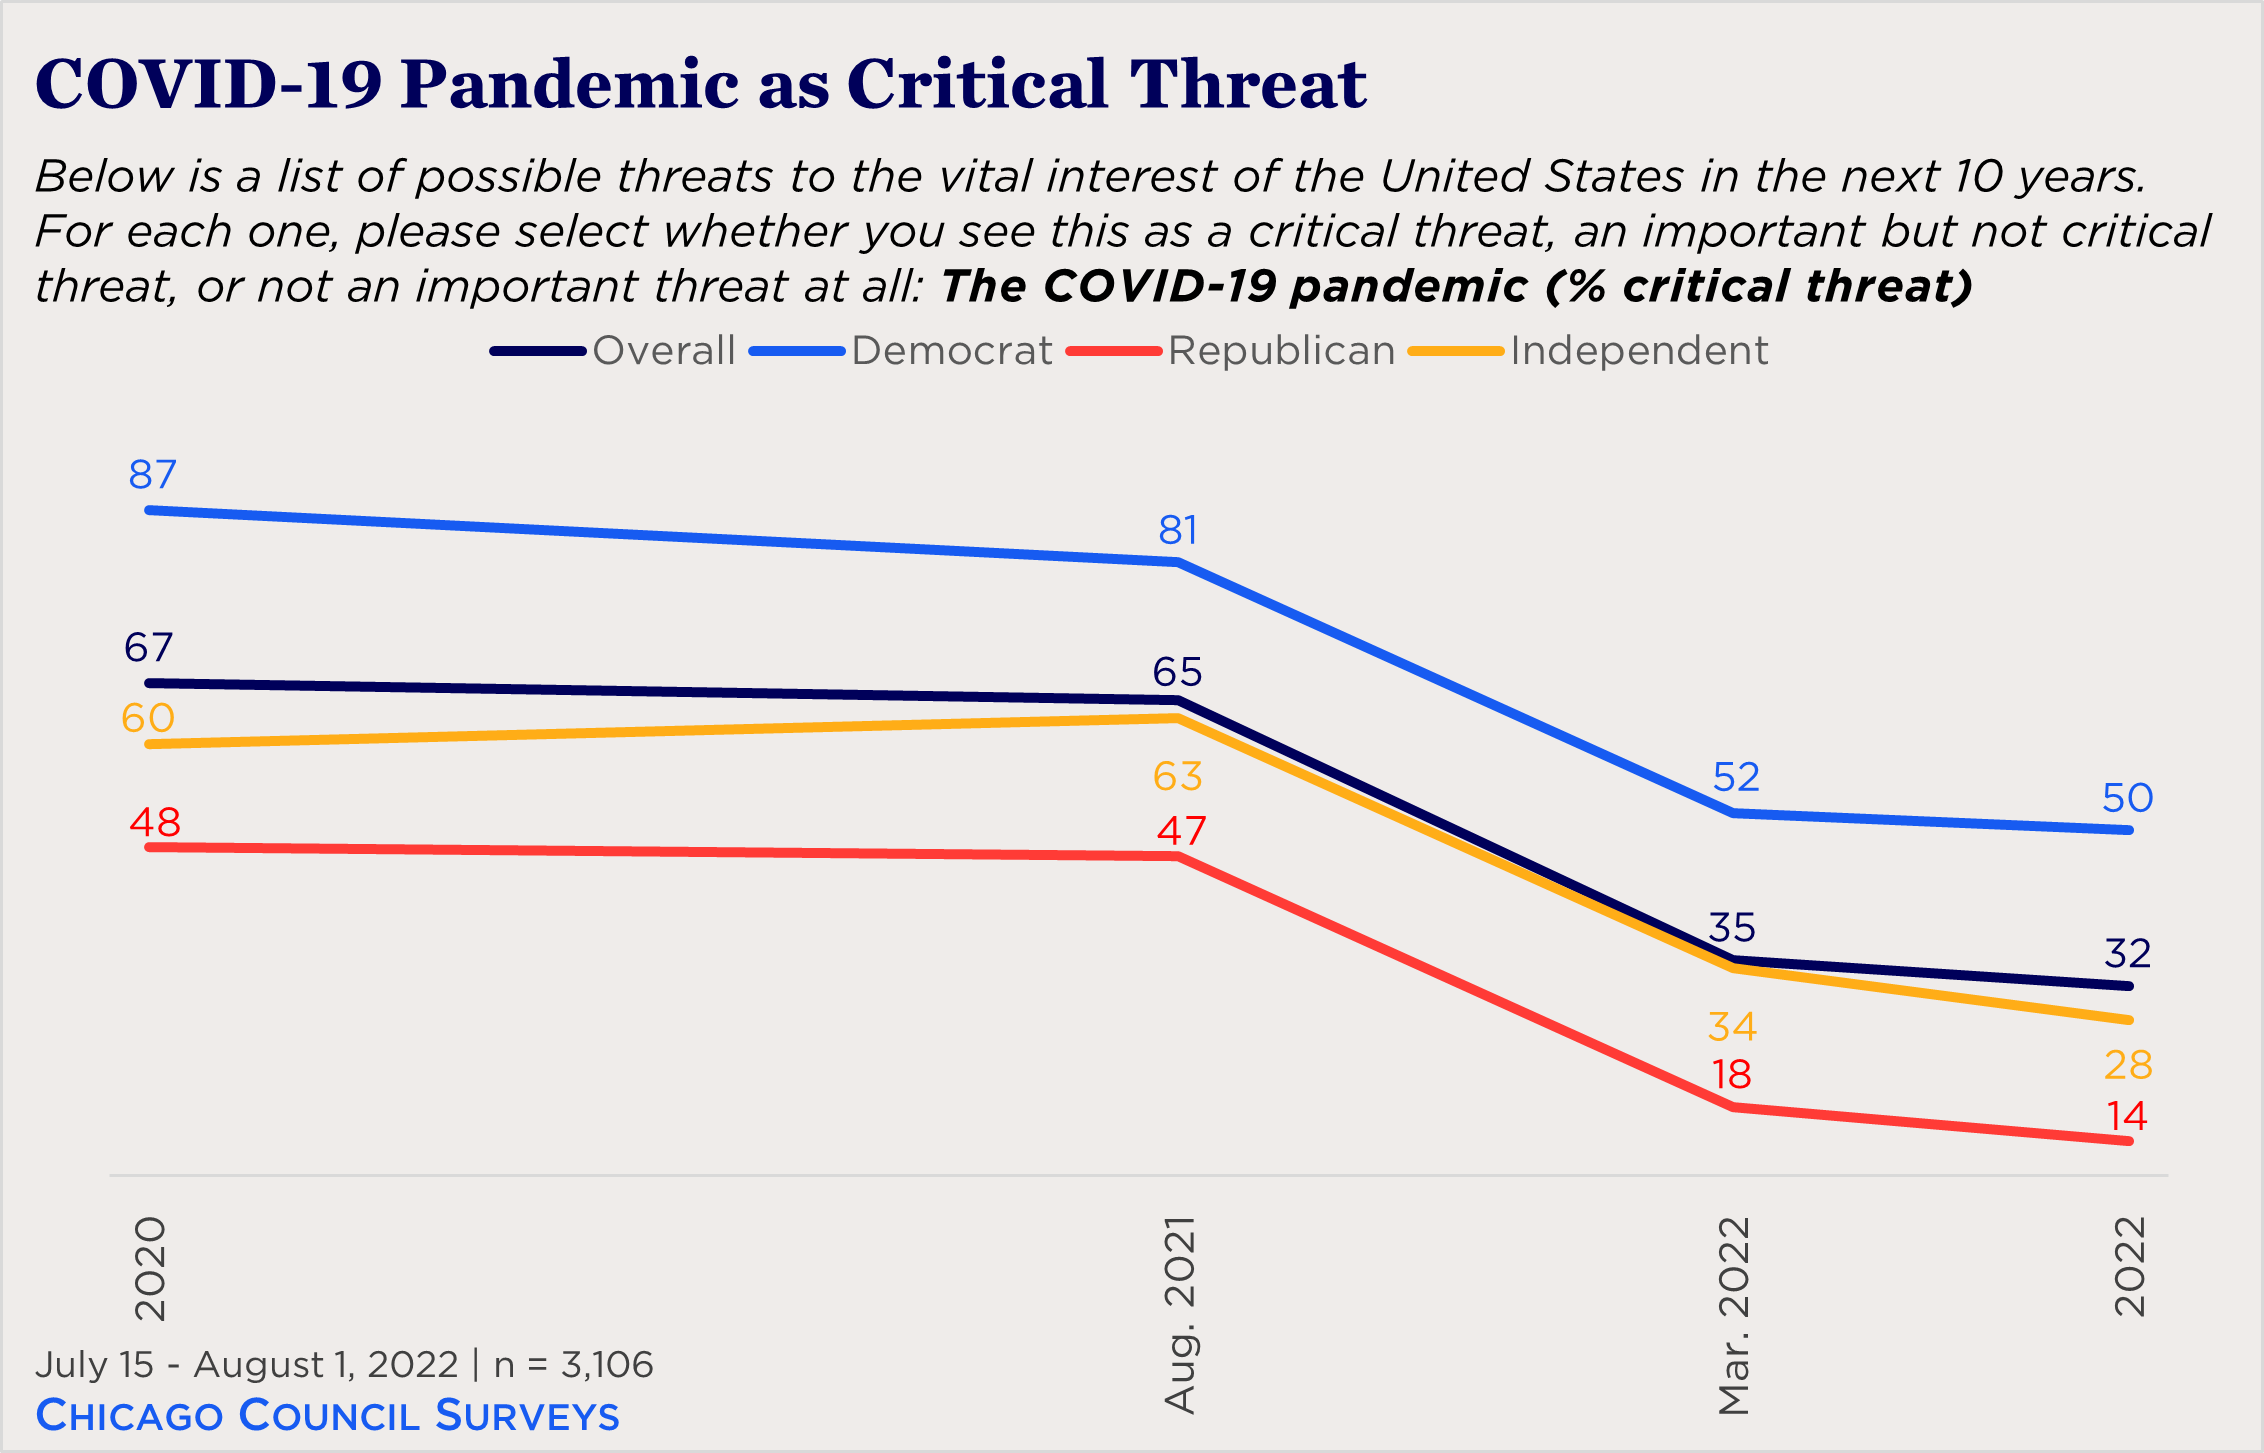 "a line chart showing partisan views of COVID-19 as a critical threat"